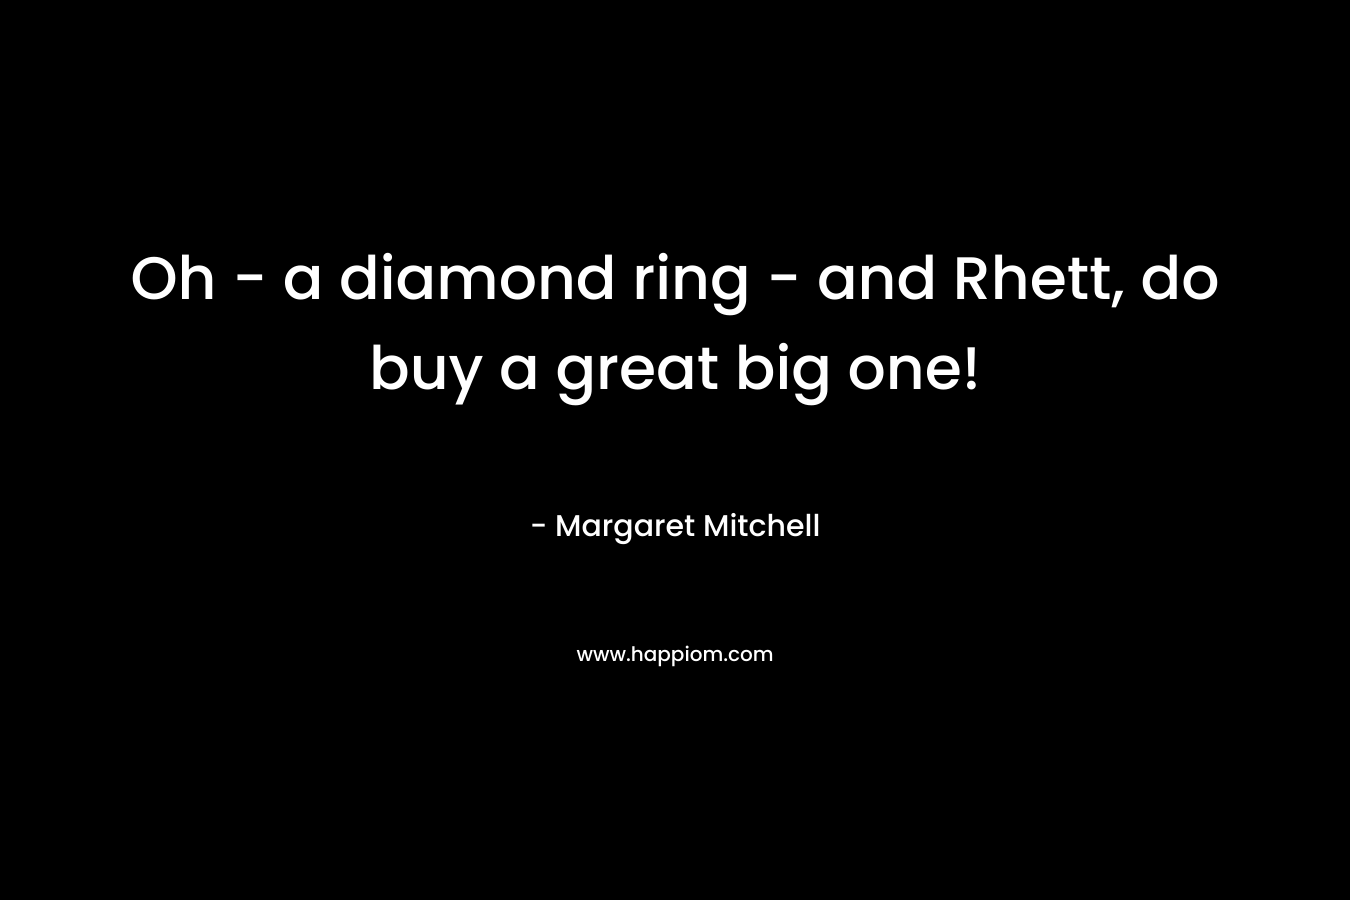 Oh – a diamond ring – and Rhett, do buy a great big one! – Margaret Mitchell